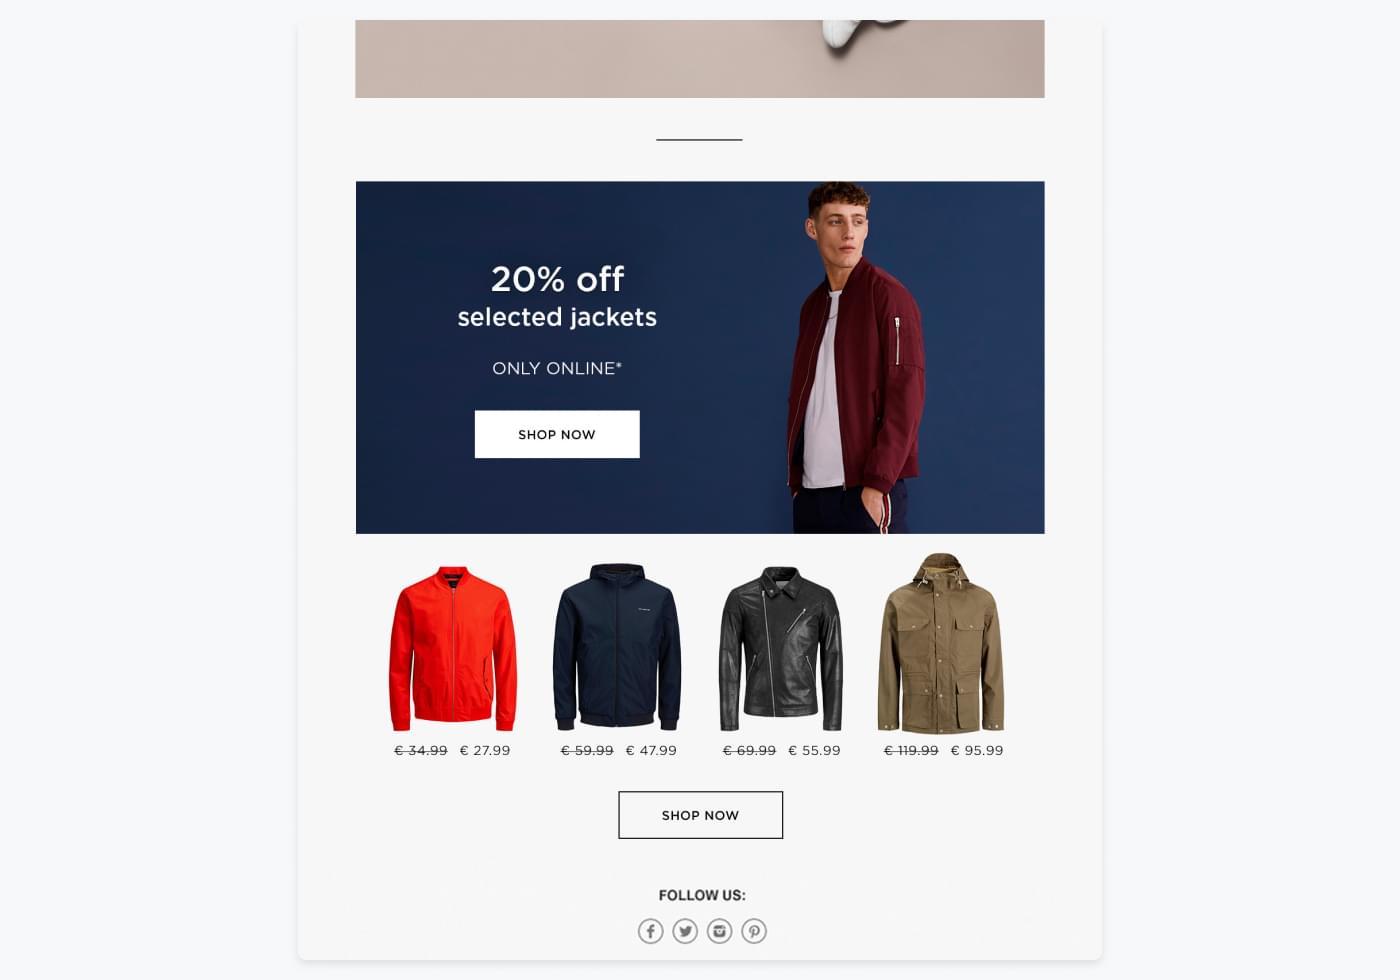 snippet from JACK & JONES' newsletter with 20% off jackets